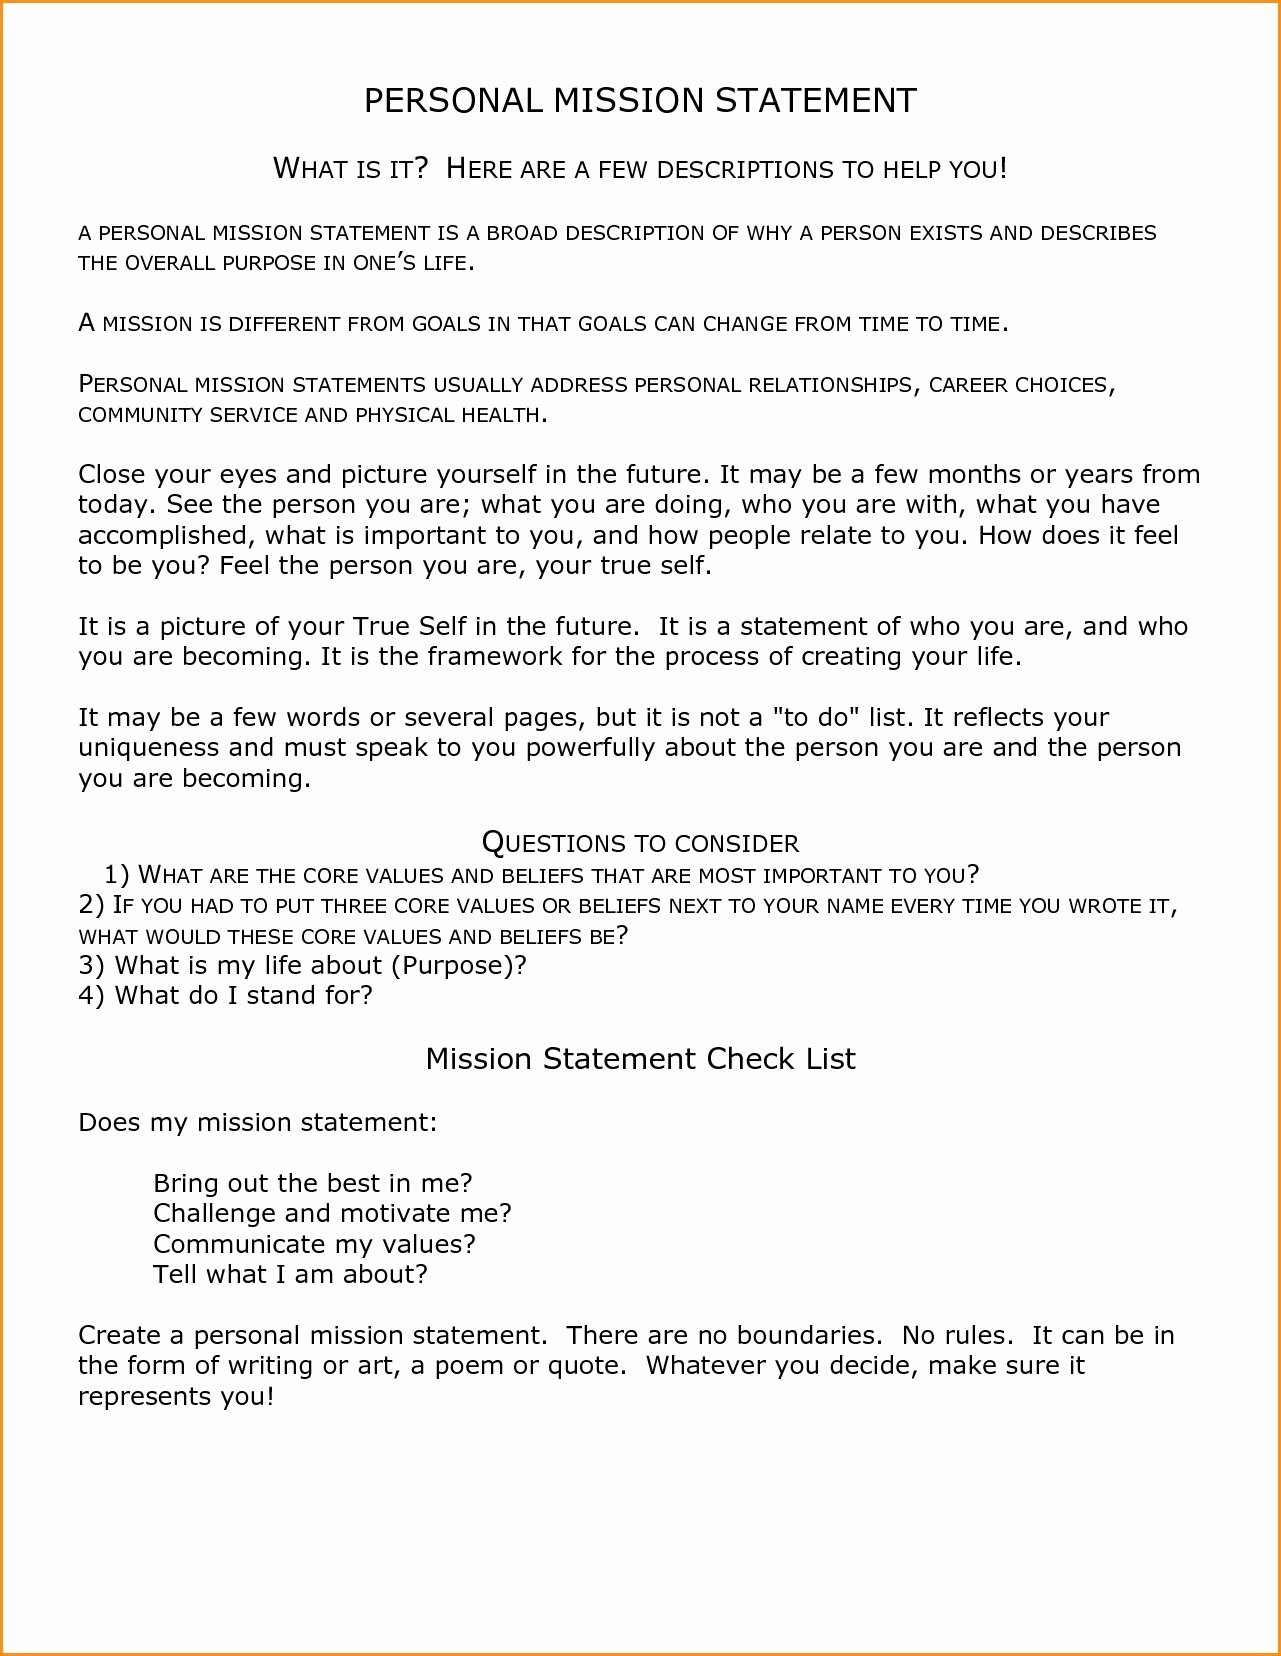 Student Mission Statement Examples Luxury Personal Mission Statement Examples for Students